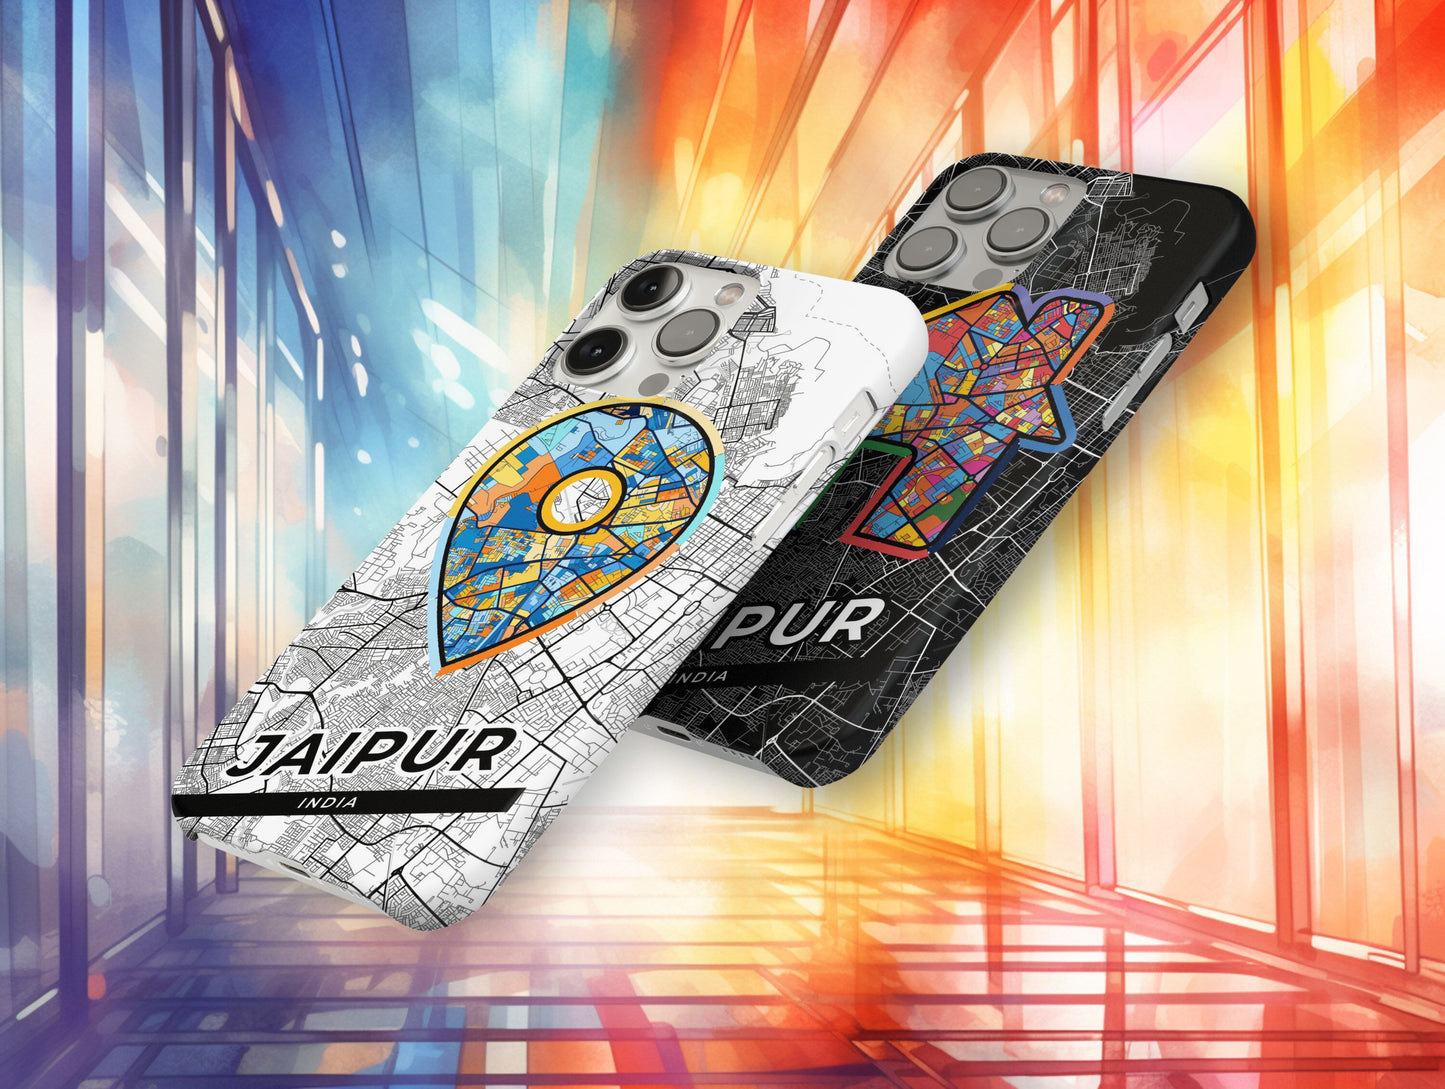 Jaipur India slim phone case with colorful icon. Birthday, wedding or housewarming gift. Couple match cases.